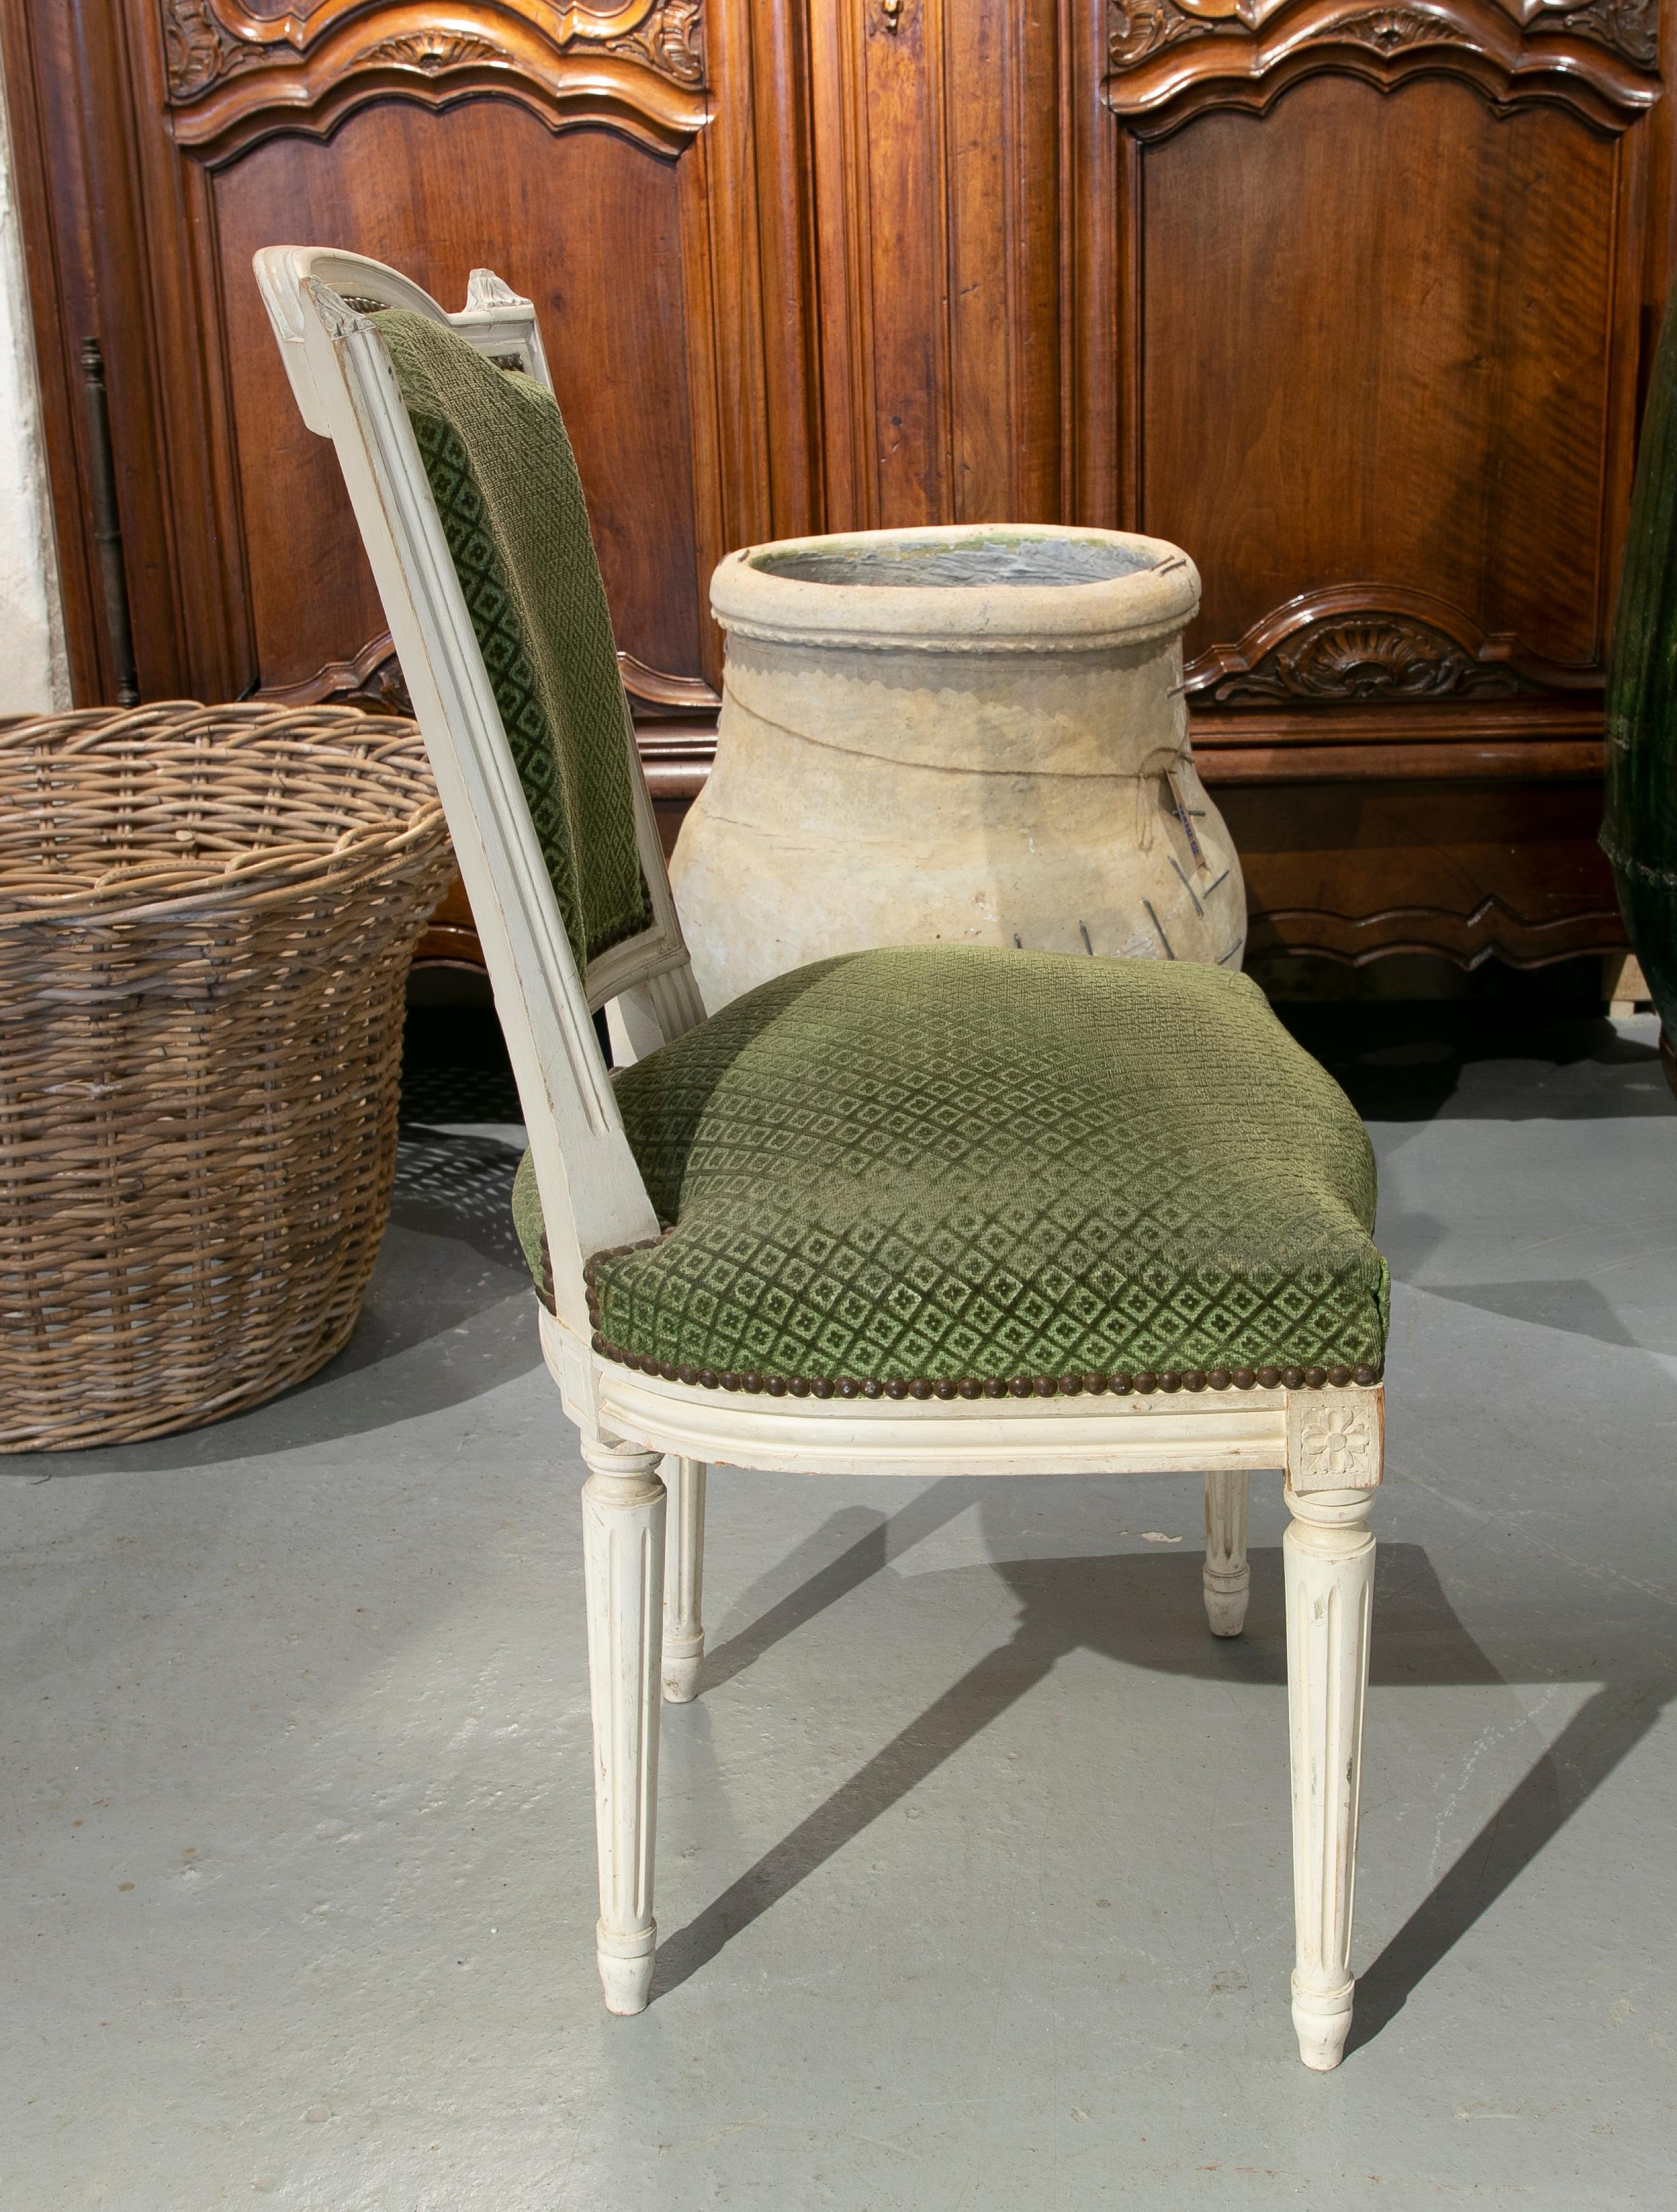 19th Century, French, Set of Six Wooden Chairs Upholstered in Green For Sale 4